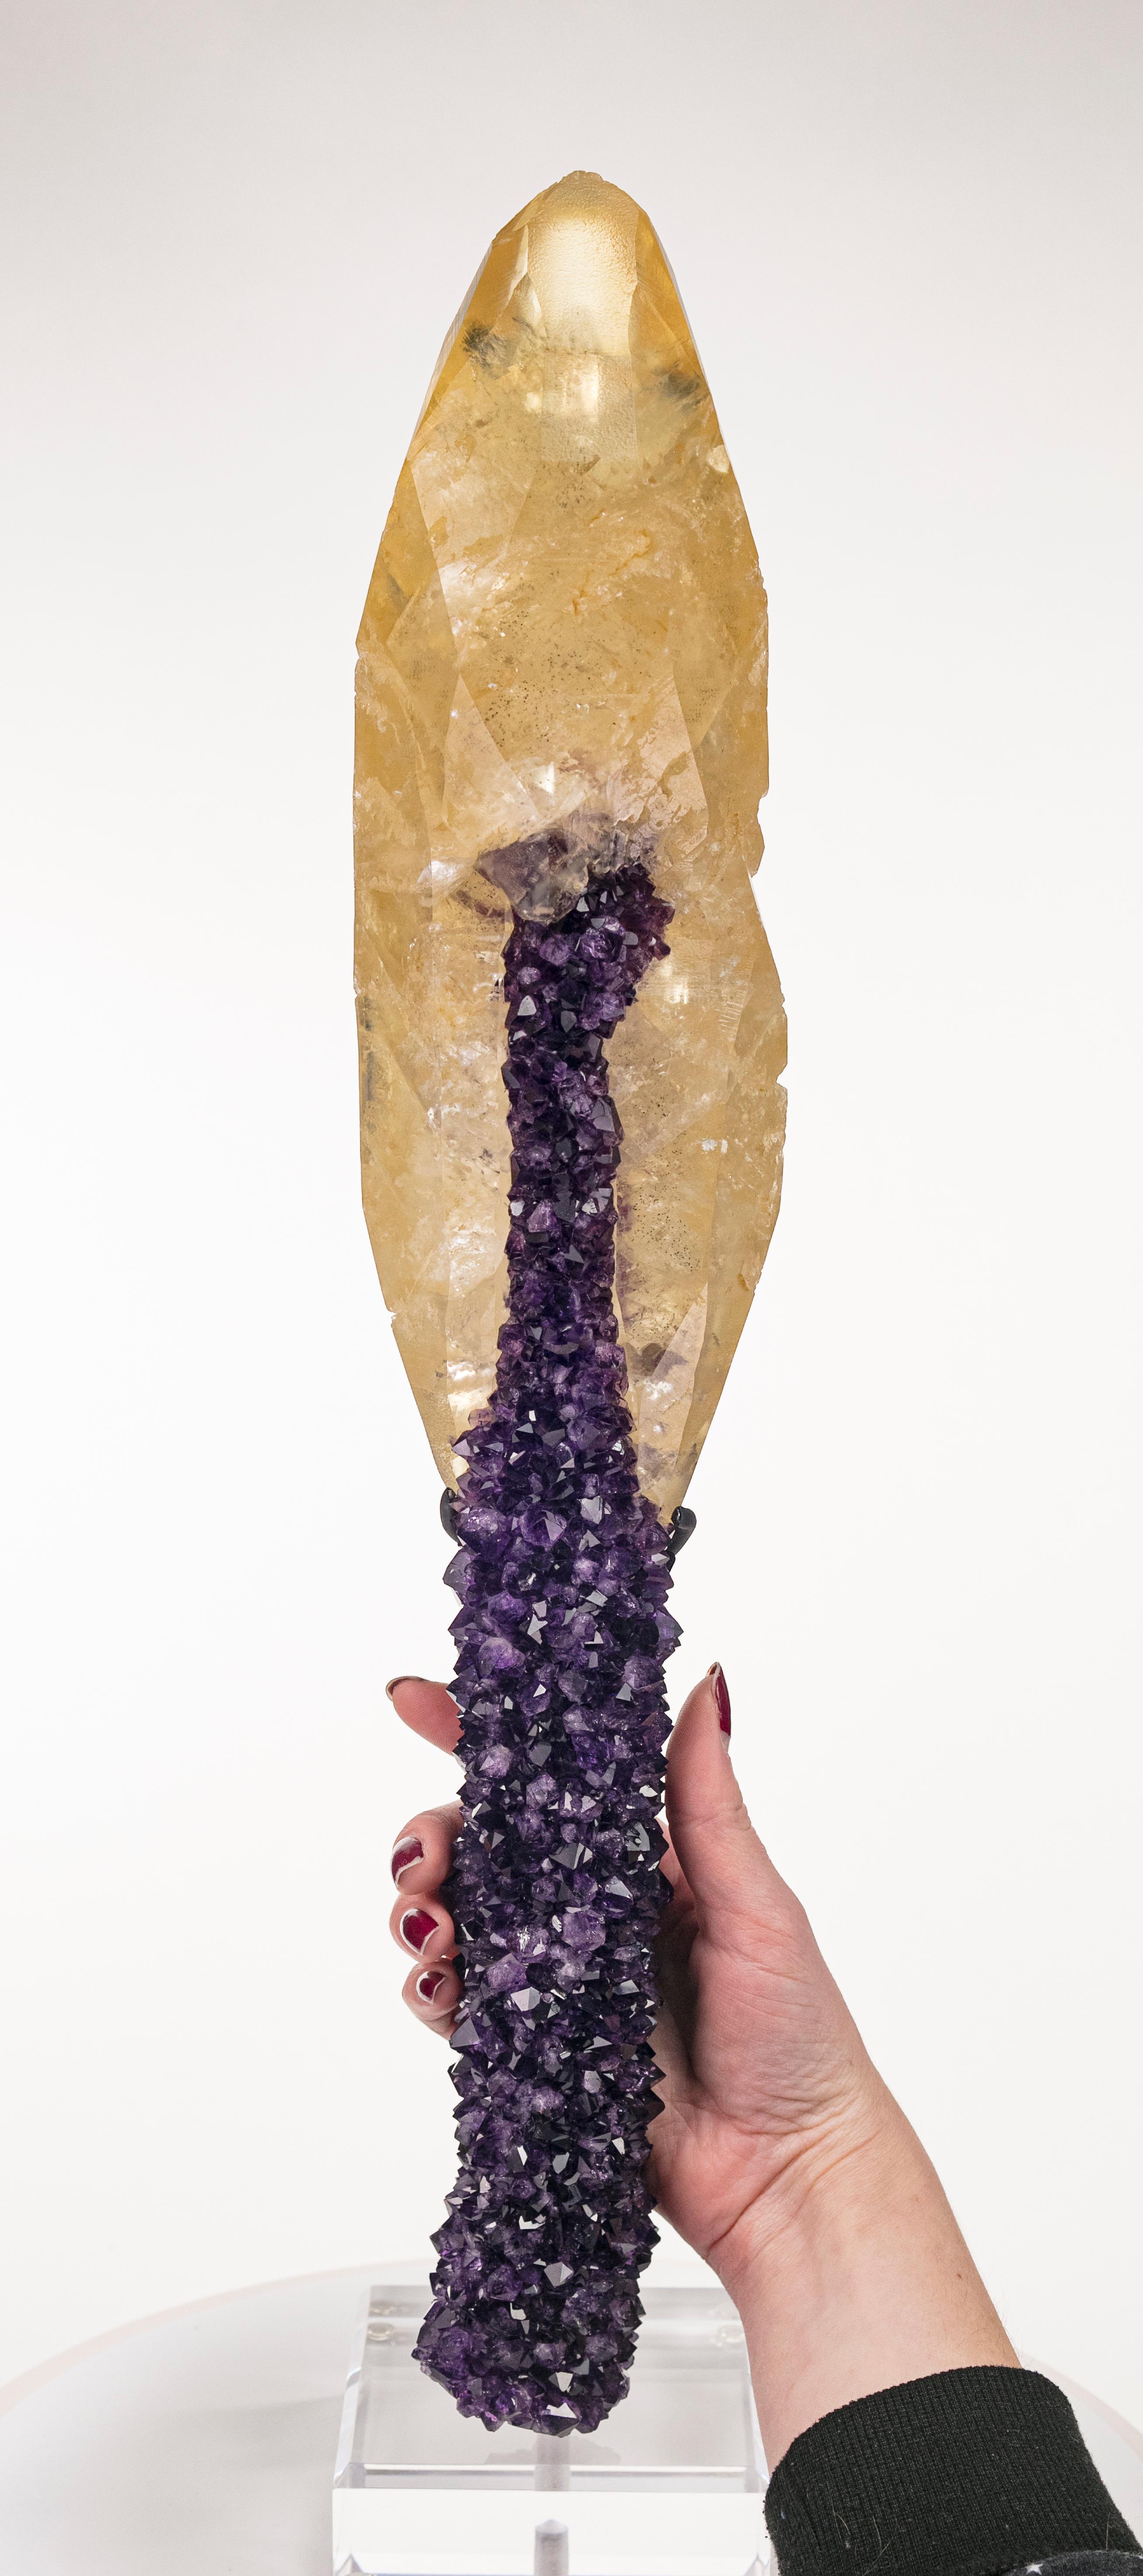 This is a stunning specimen featuring two commonly known species (amethyst and calcite) that have culminated in a wholly unbelievable and unusual composition. Deep, grape-jelly purple amethyst crystals have clustered together to create a lustrous